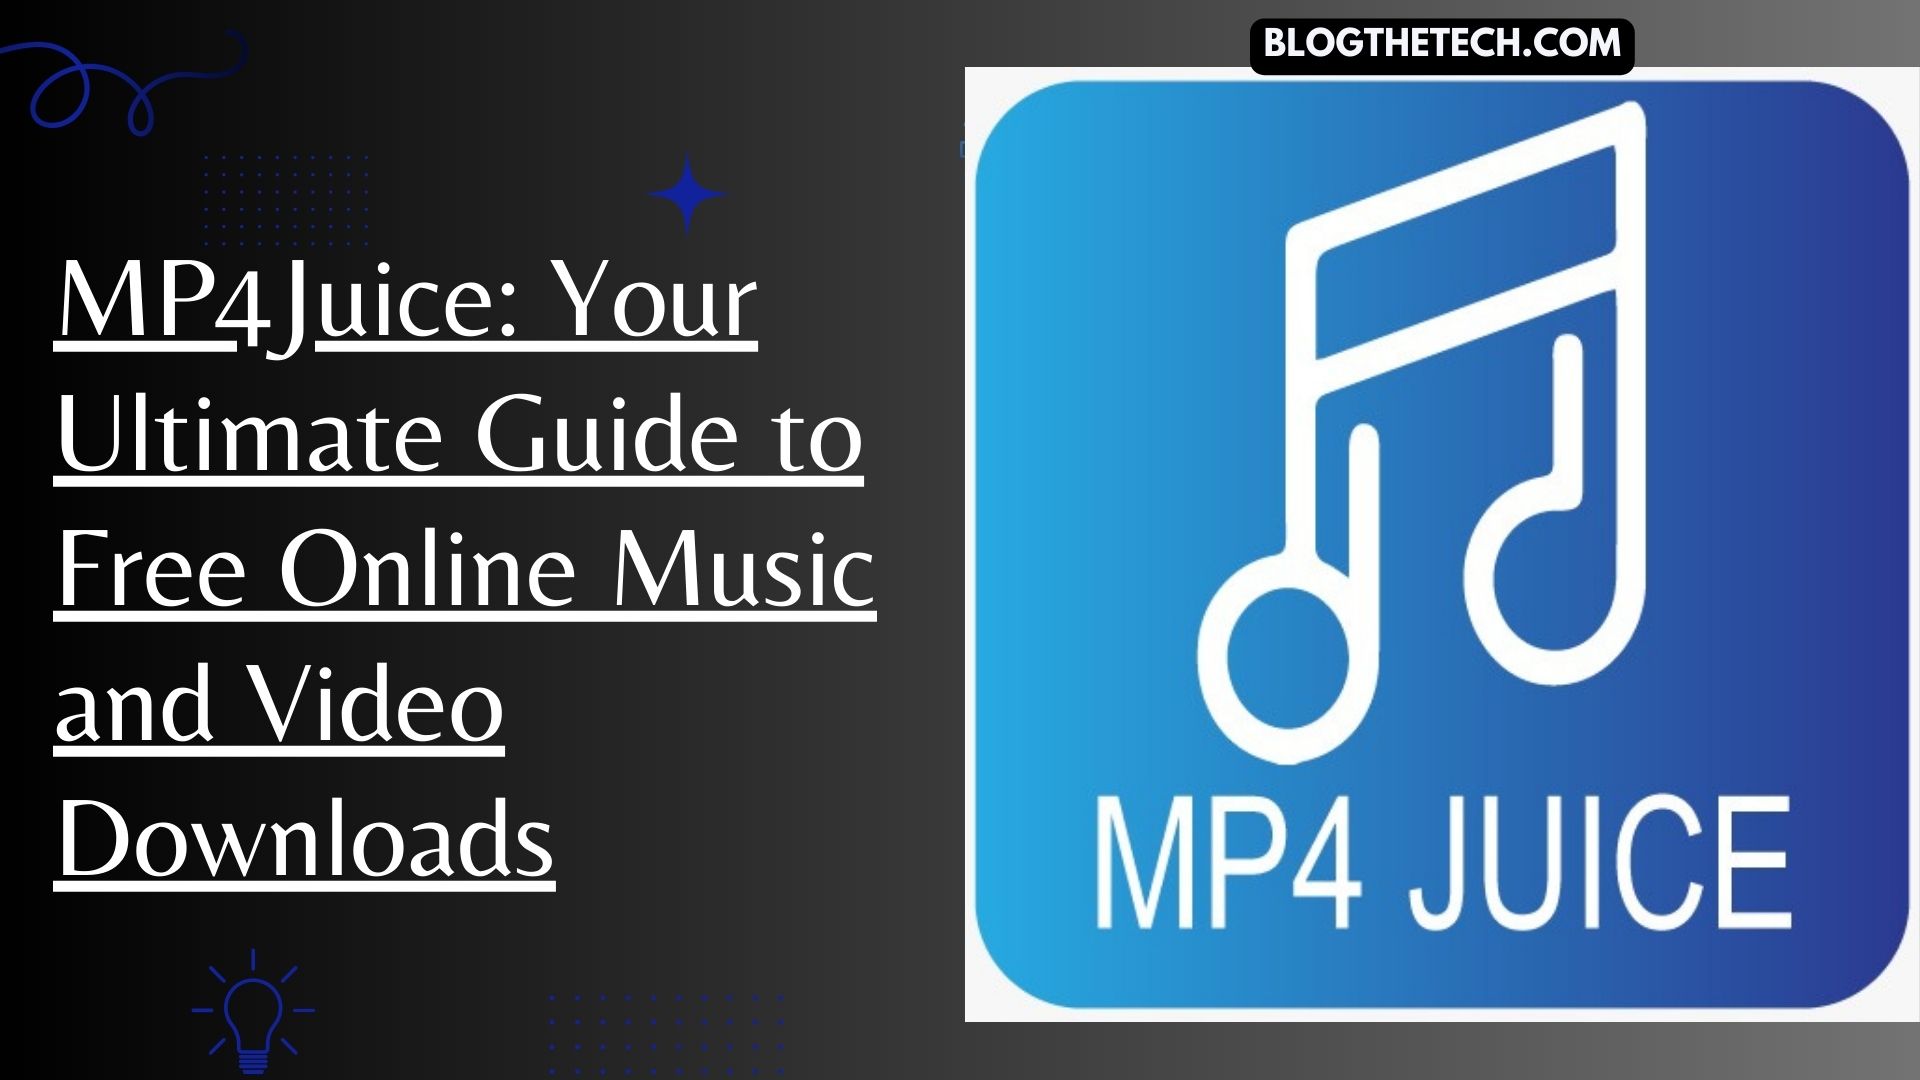 mp4juice-free-online-music-video-downloads:featured